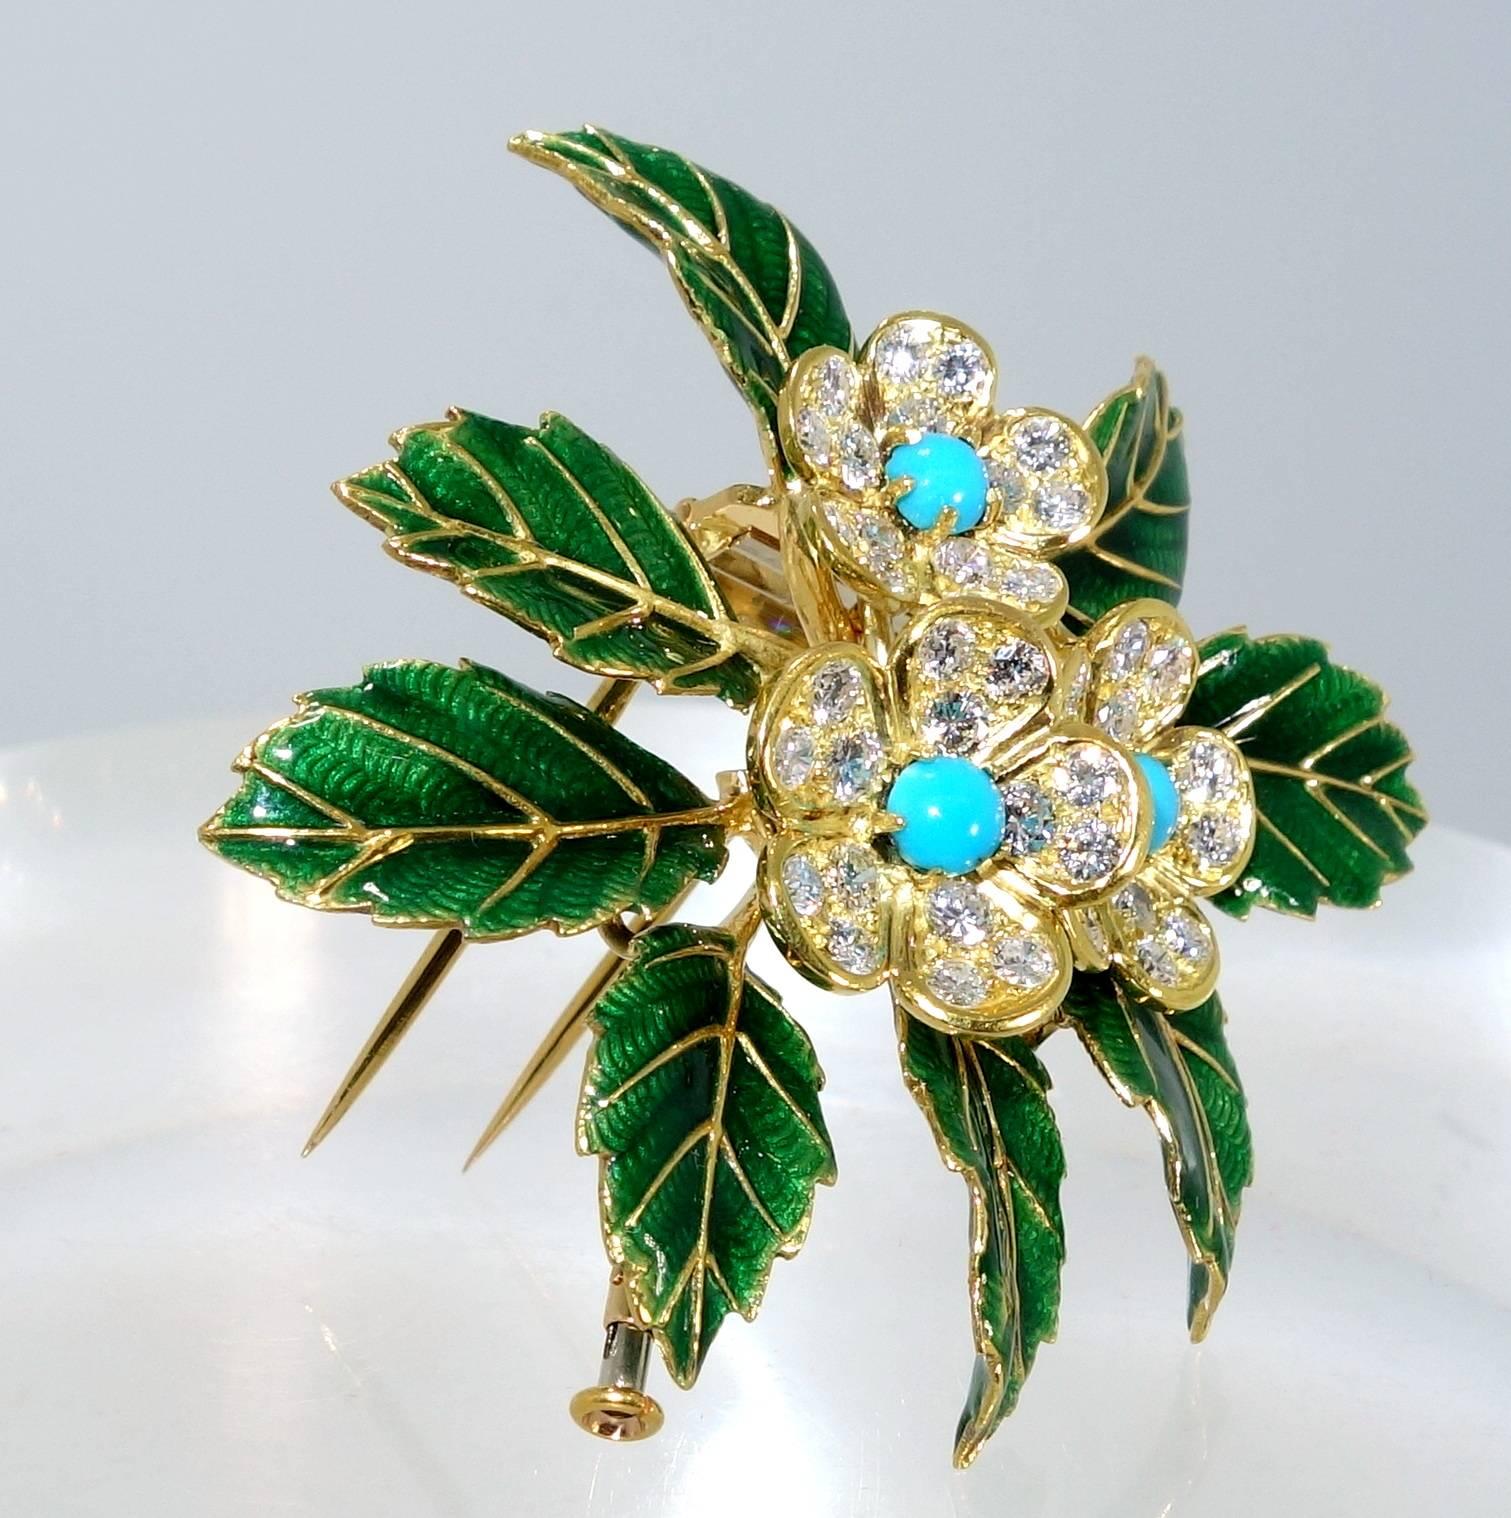 By the famous French House of Boucheron, this double clip brooch has green enameled leaves with a center of diamond and Persian turquoise flowers.  There are 45 diamonds will weigh approximately 1.95 cts., these diamonds are superb quality.  The